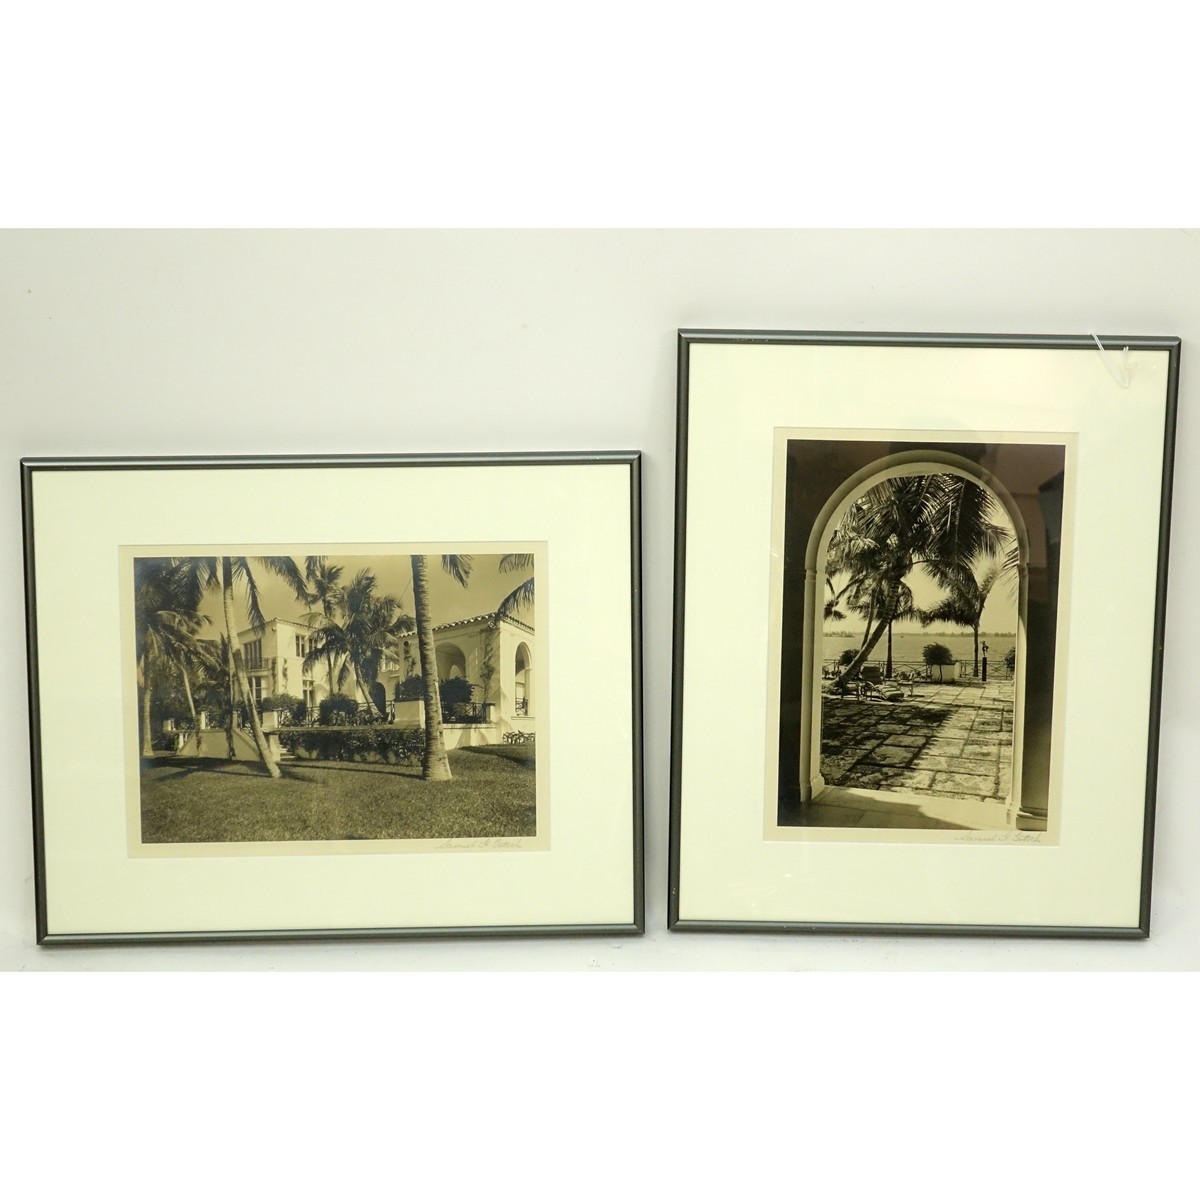 Two (2) Works by Samuel Gottscho, American (1875 - 1971) Black and White Silver Gelatin Prints of Two Distinctive Outdoor Scenes, Each Signed in Pencil Lower Right. Good condition.